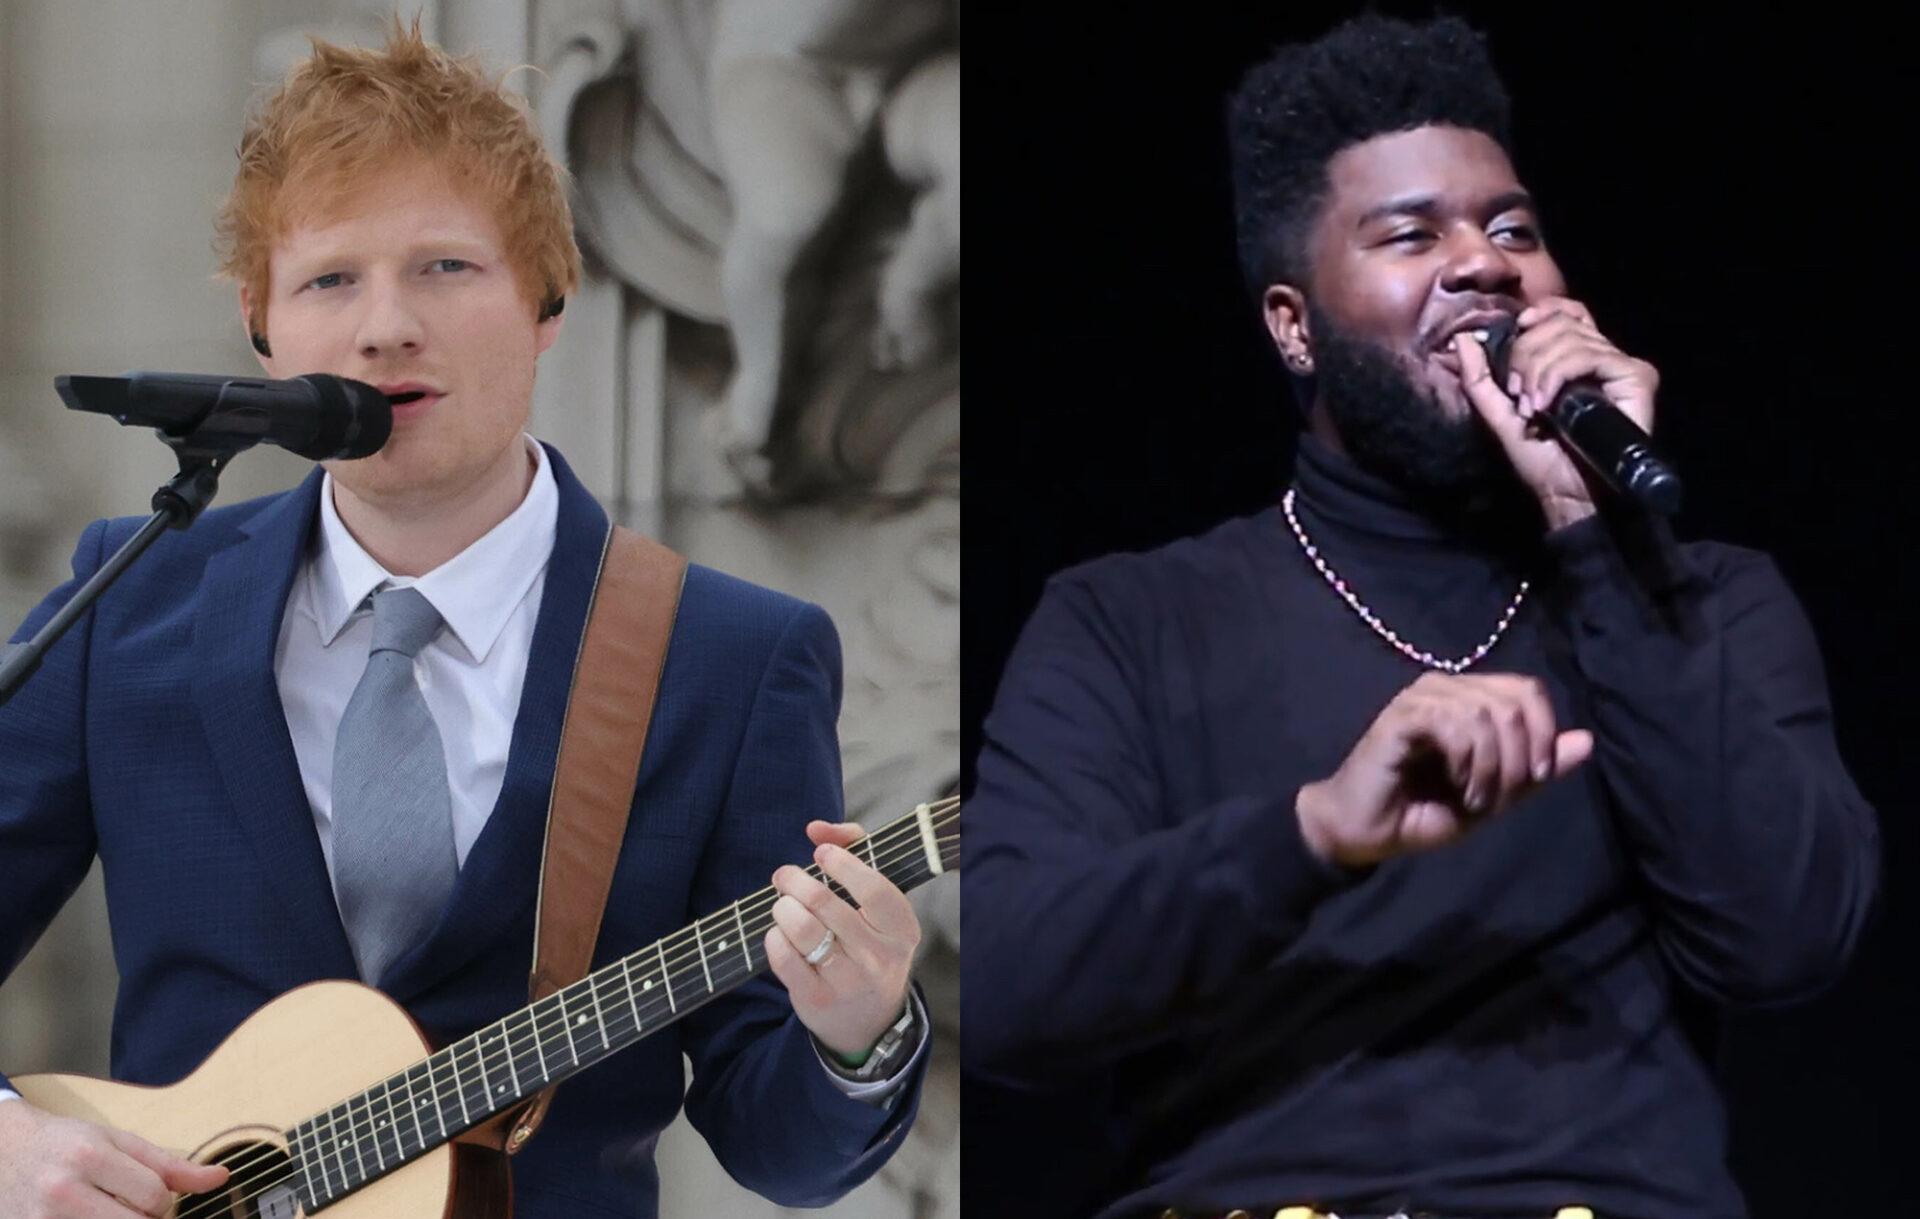 Ed Sheeran opens gig after support act Khalid involved in car crash